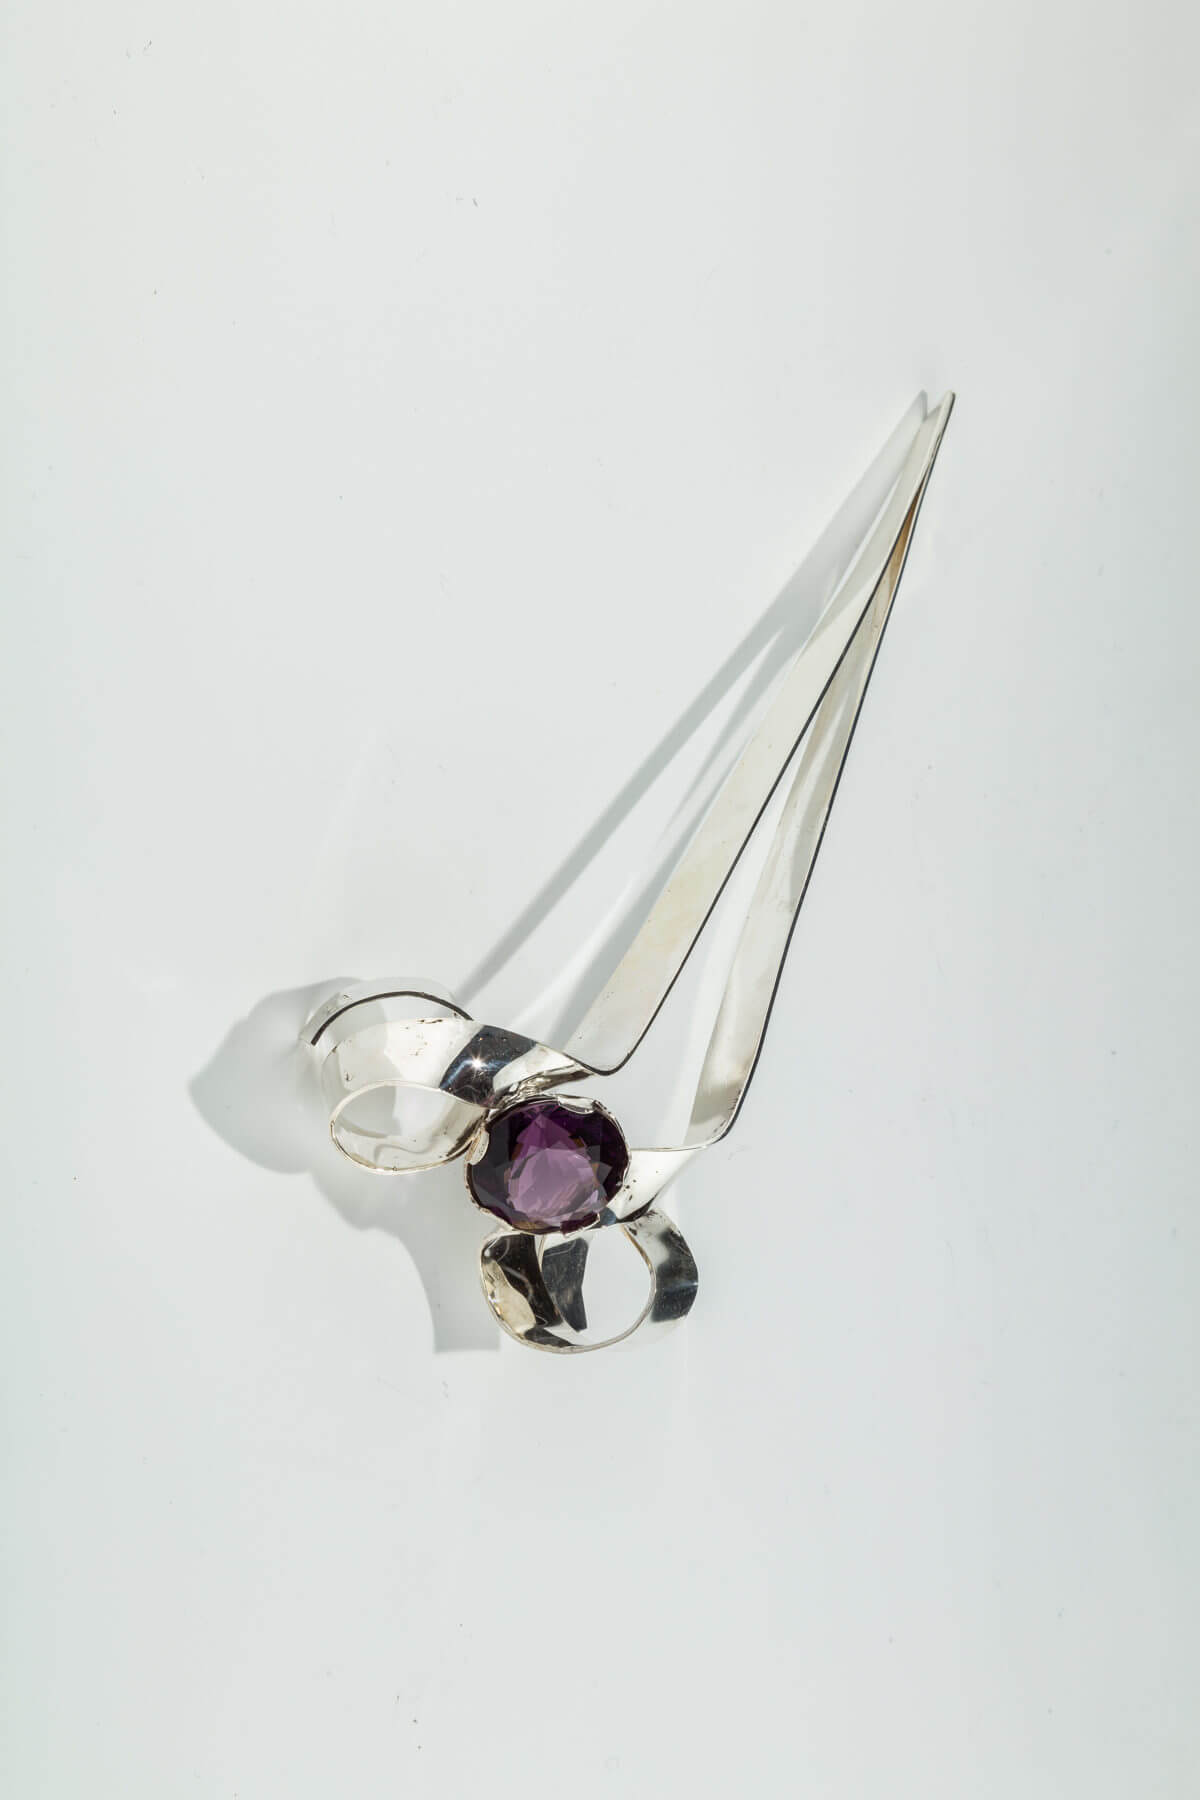 140. A Sterling Silver and Amethyst Torah Pointer by Harold Rabinowitz